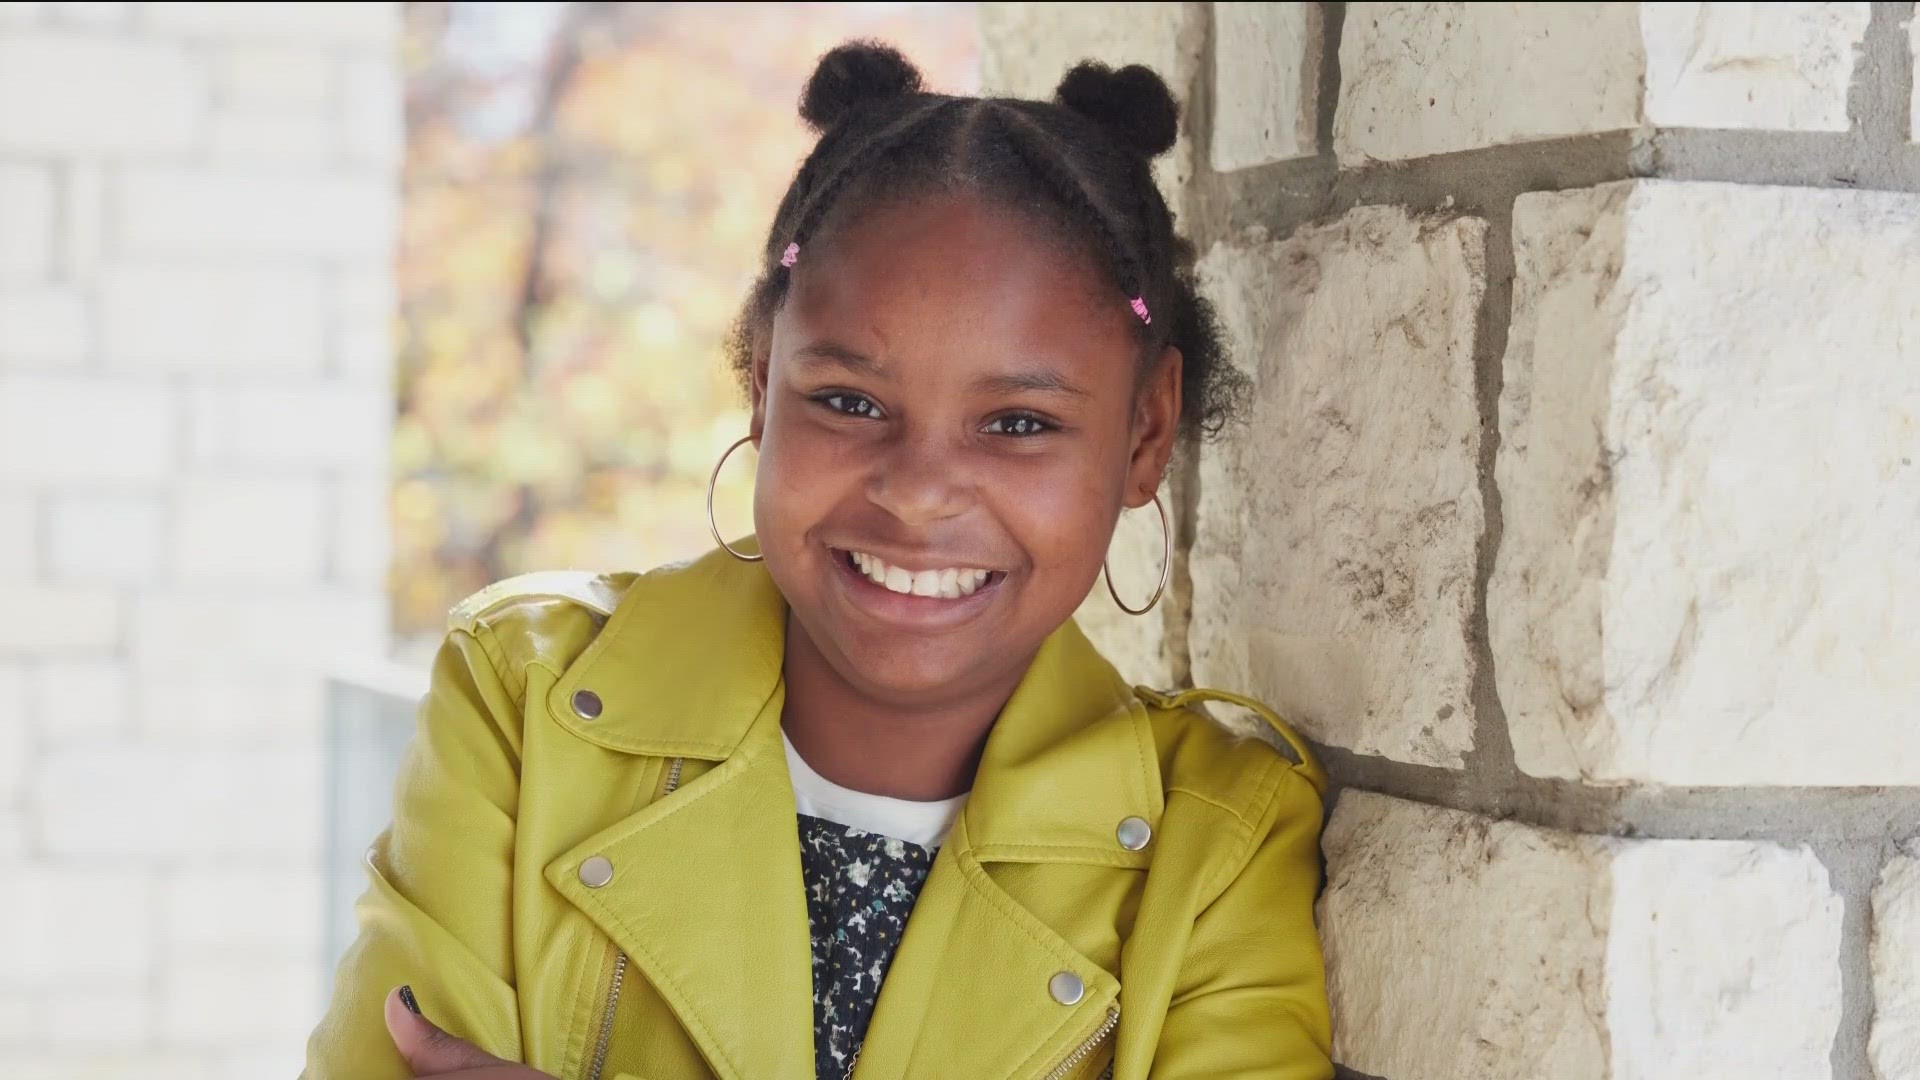 A'Aliyah – who goes by her middle name, Denise – has been in foster care for several years. She dreams of finding a forever families who will take care of her.